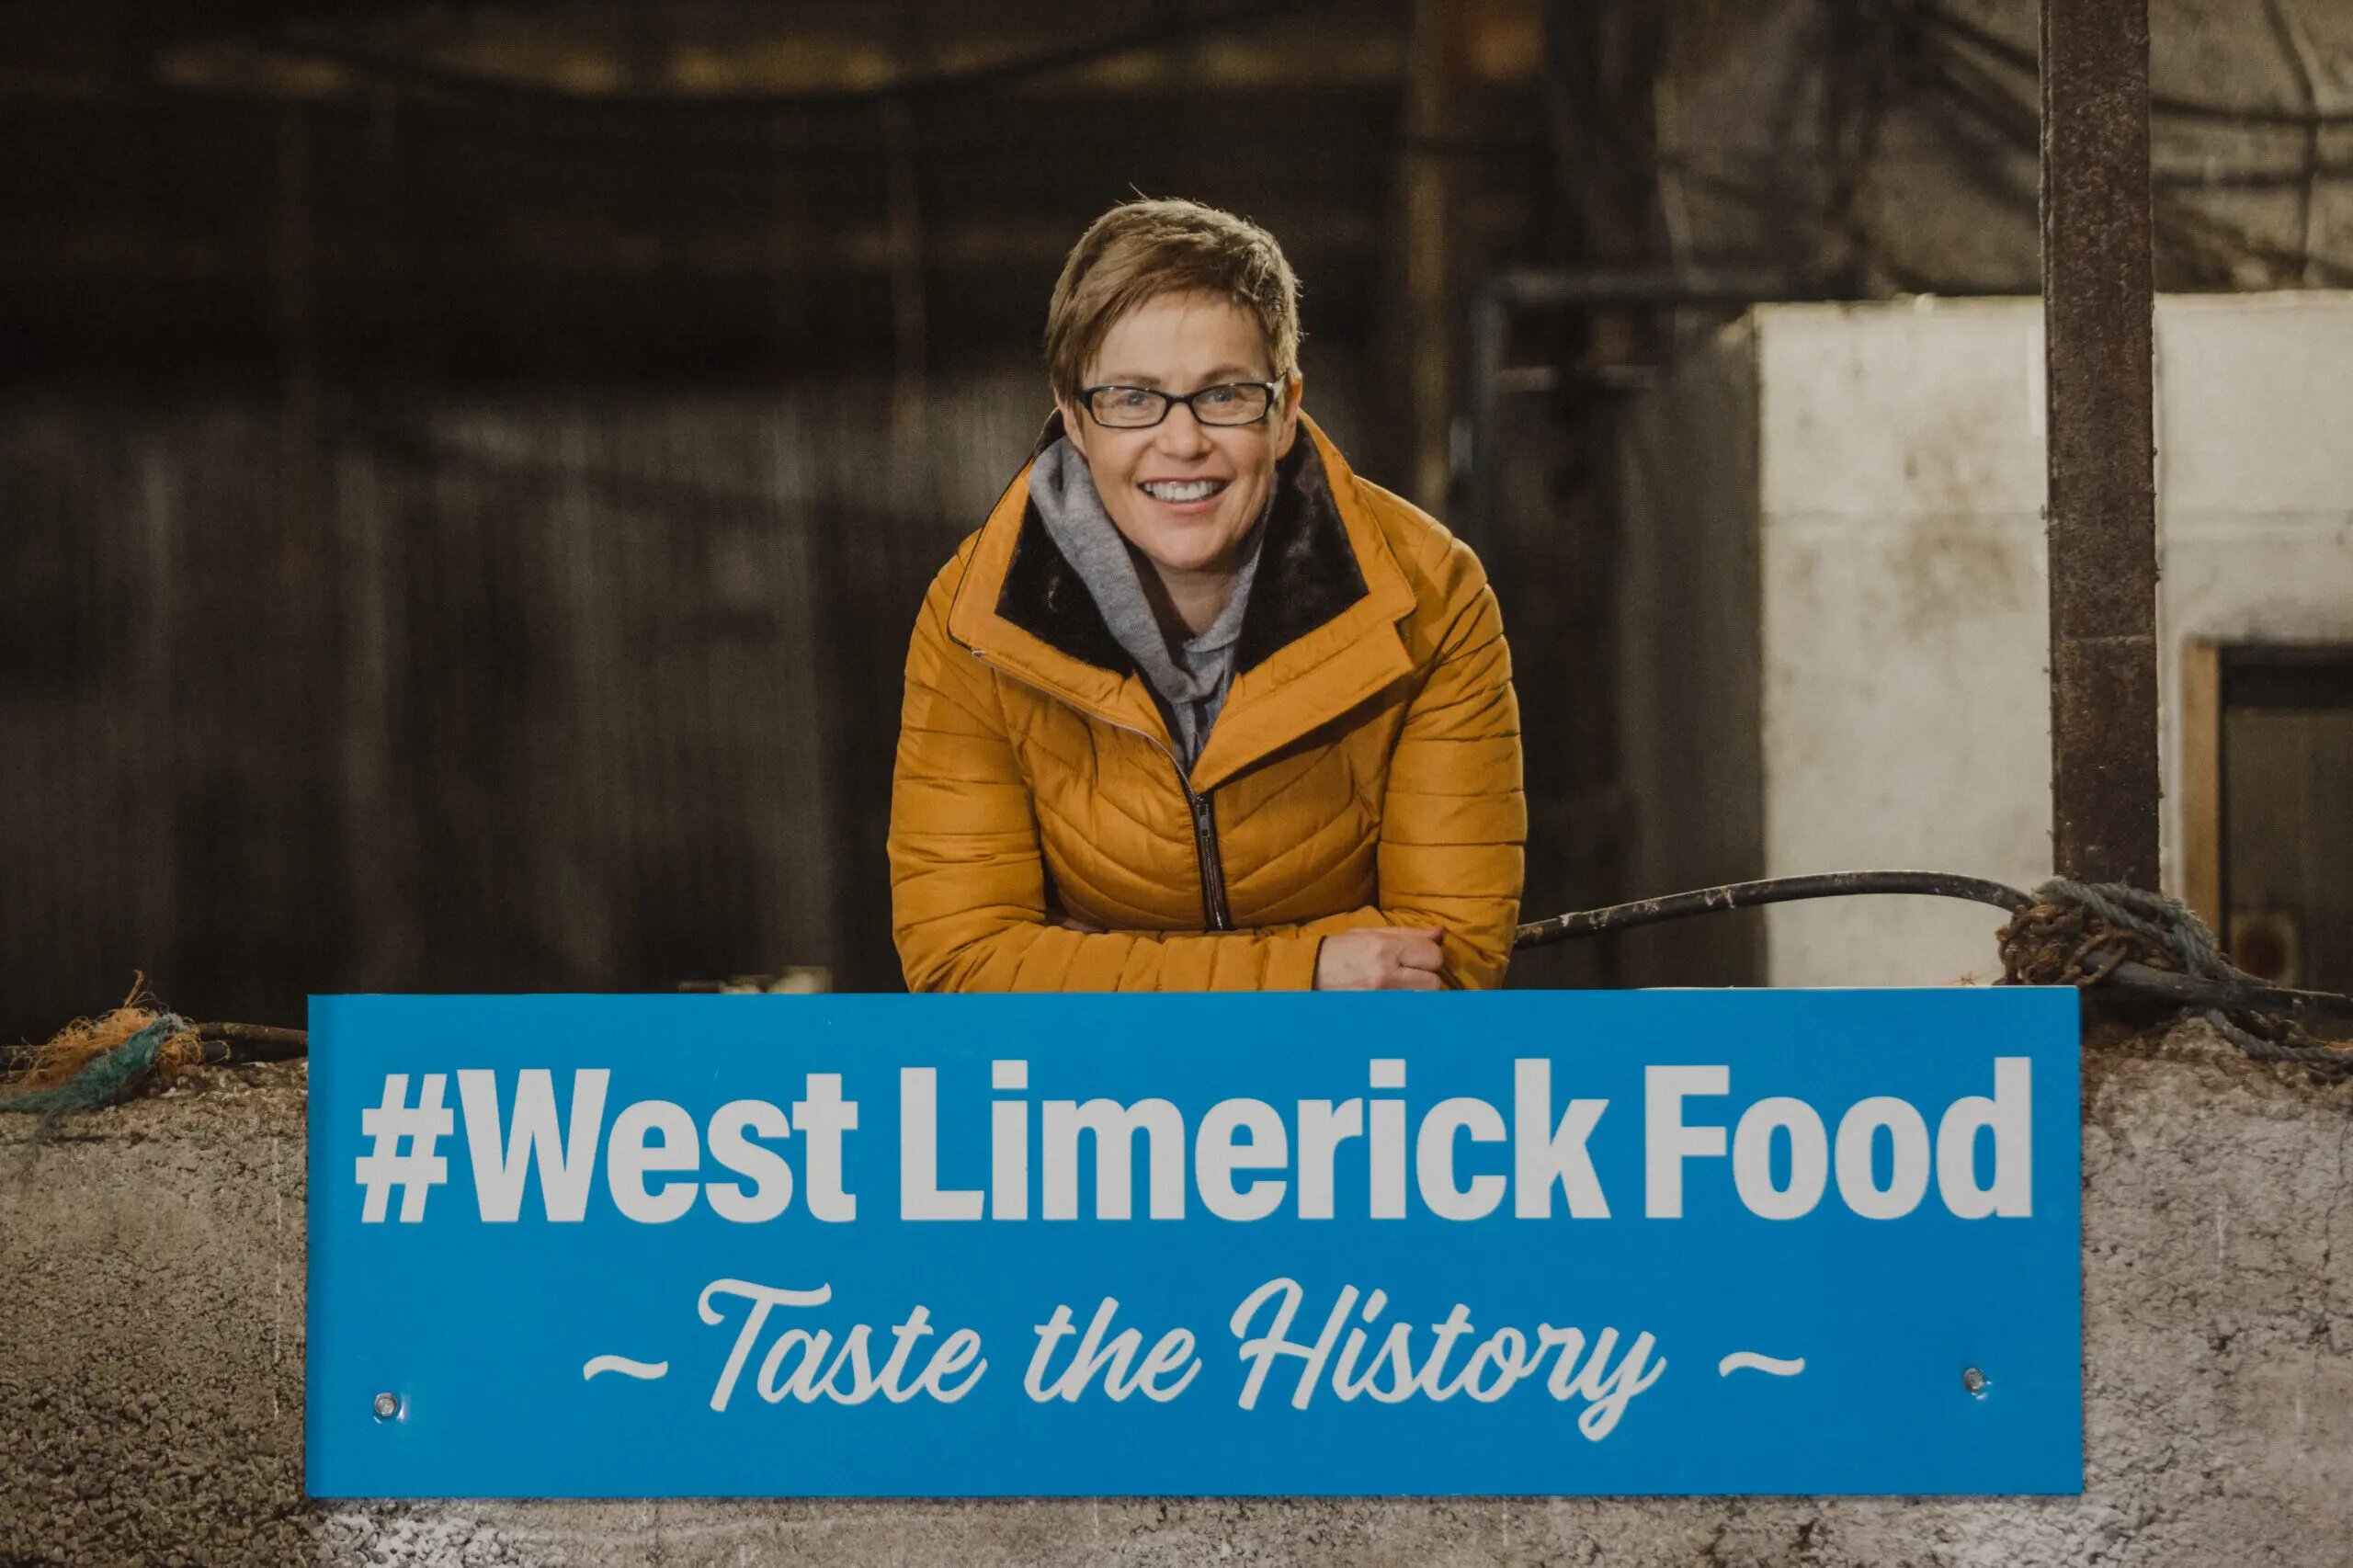 Limerick SpringFest Participants of the West Limerick Food Series have announced that the inaugural family-friendly Limerick SpringFest will take place on Wednesday 6th April from 1.00pm – 6.00pm at the Barnagh Greenway Hub outside Newcastle West.